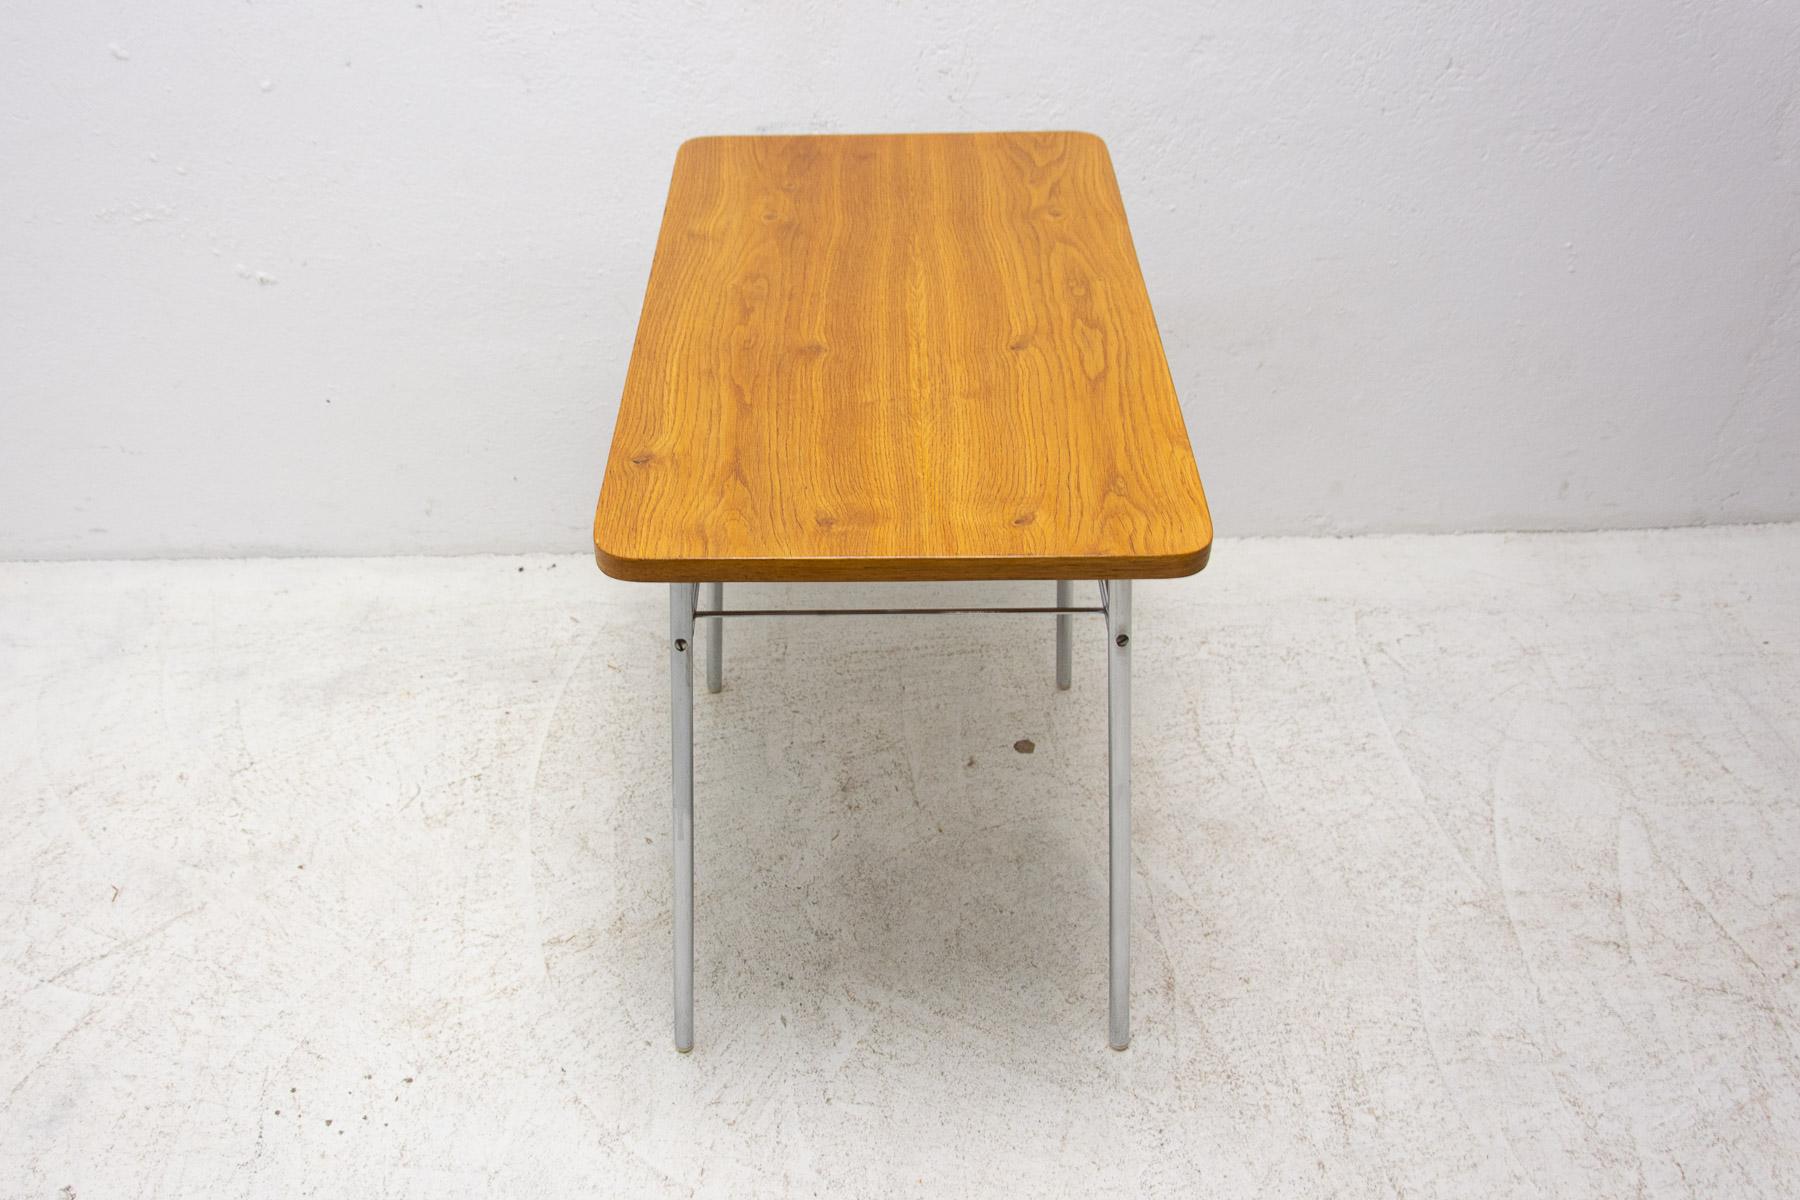 20th Century Fully Renovated Chrome and Wood Side Table, 1950s, Czechoslovakia For Sale